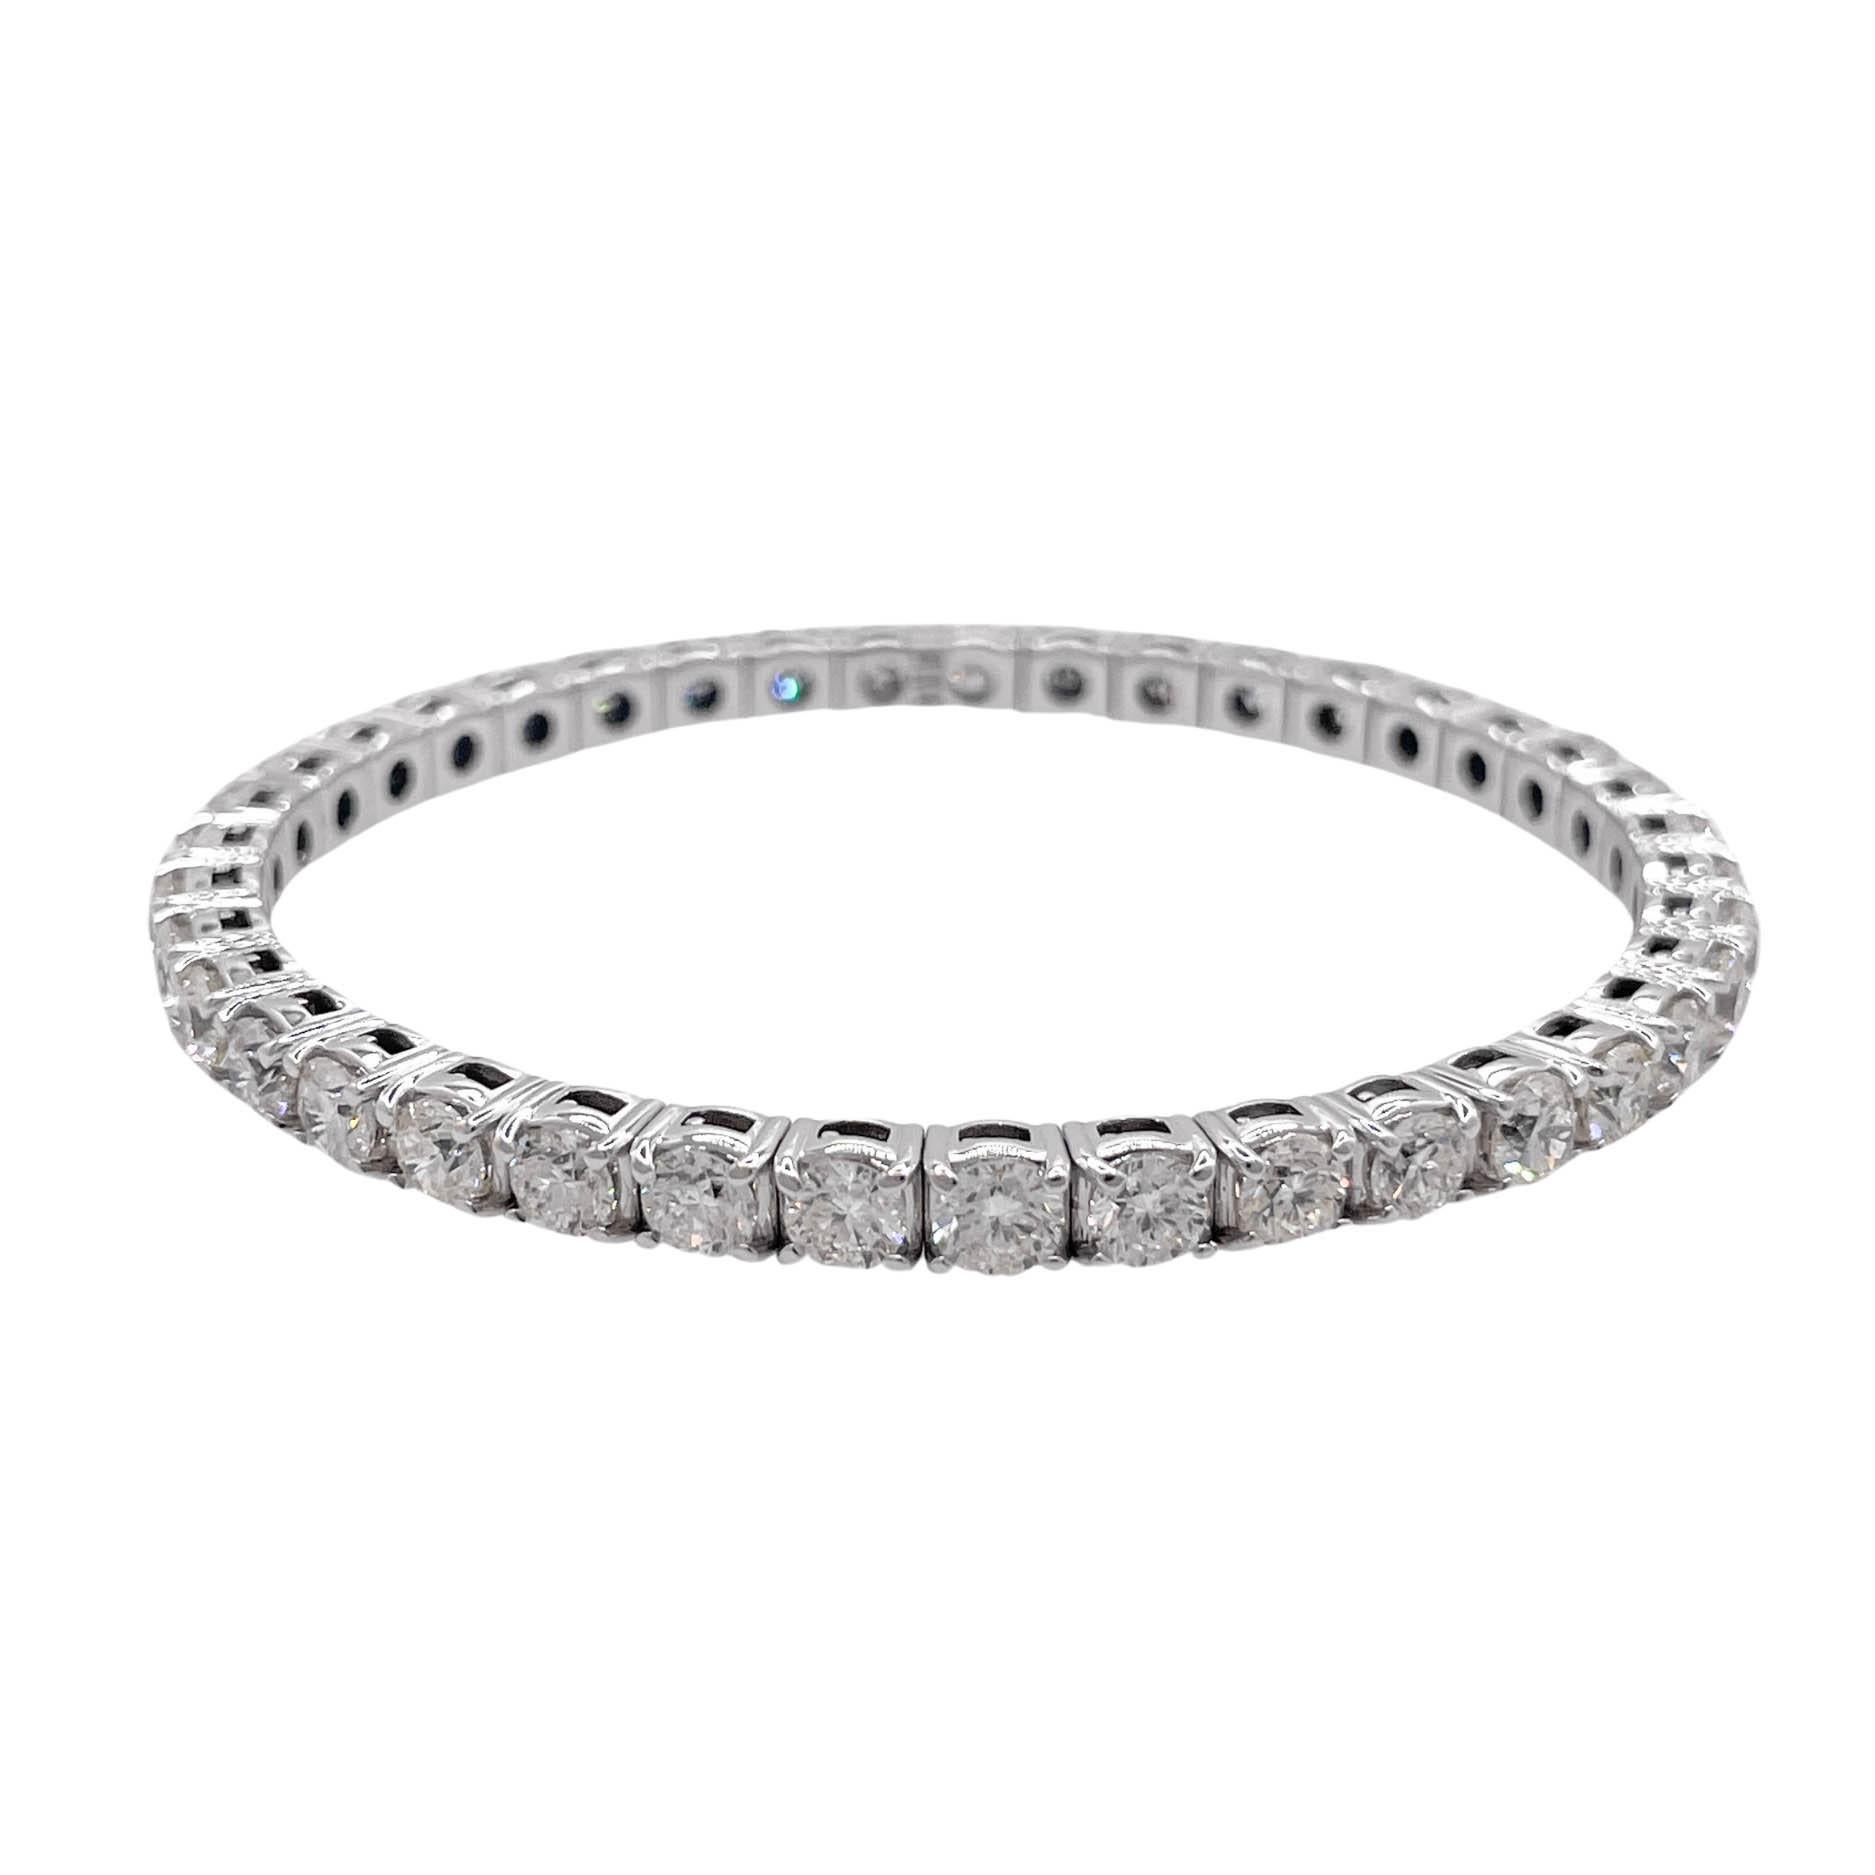 Jay Feder 18k White Gold Diamond Stretchy Tennis Bangle Bracelet In Excellent Condition For Sale In Boca Raton, FL